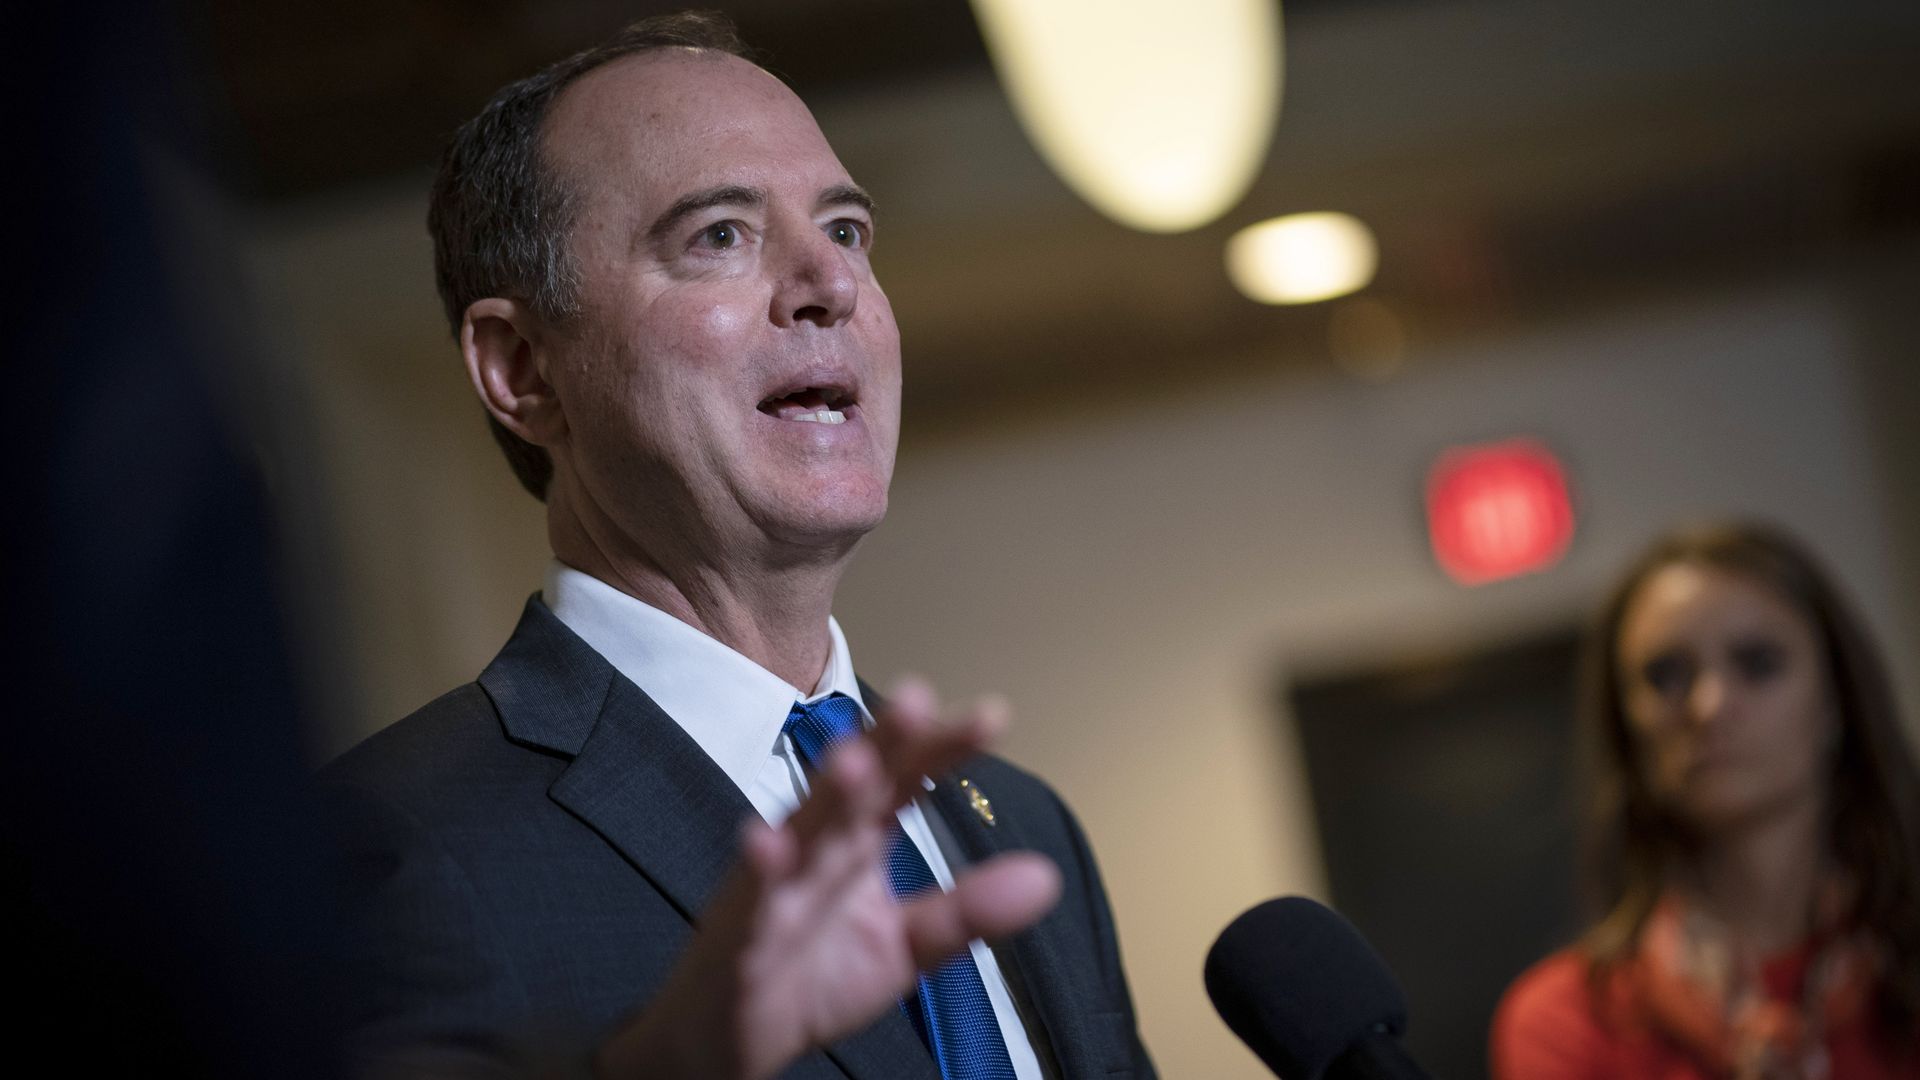  Rep. Adam Schiff (D-CA) speaks to reporters following a closed-door hearing with the House Intelligence, Foreign Affairs and Oversight committees at the U.S. Capitol on November 4